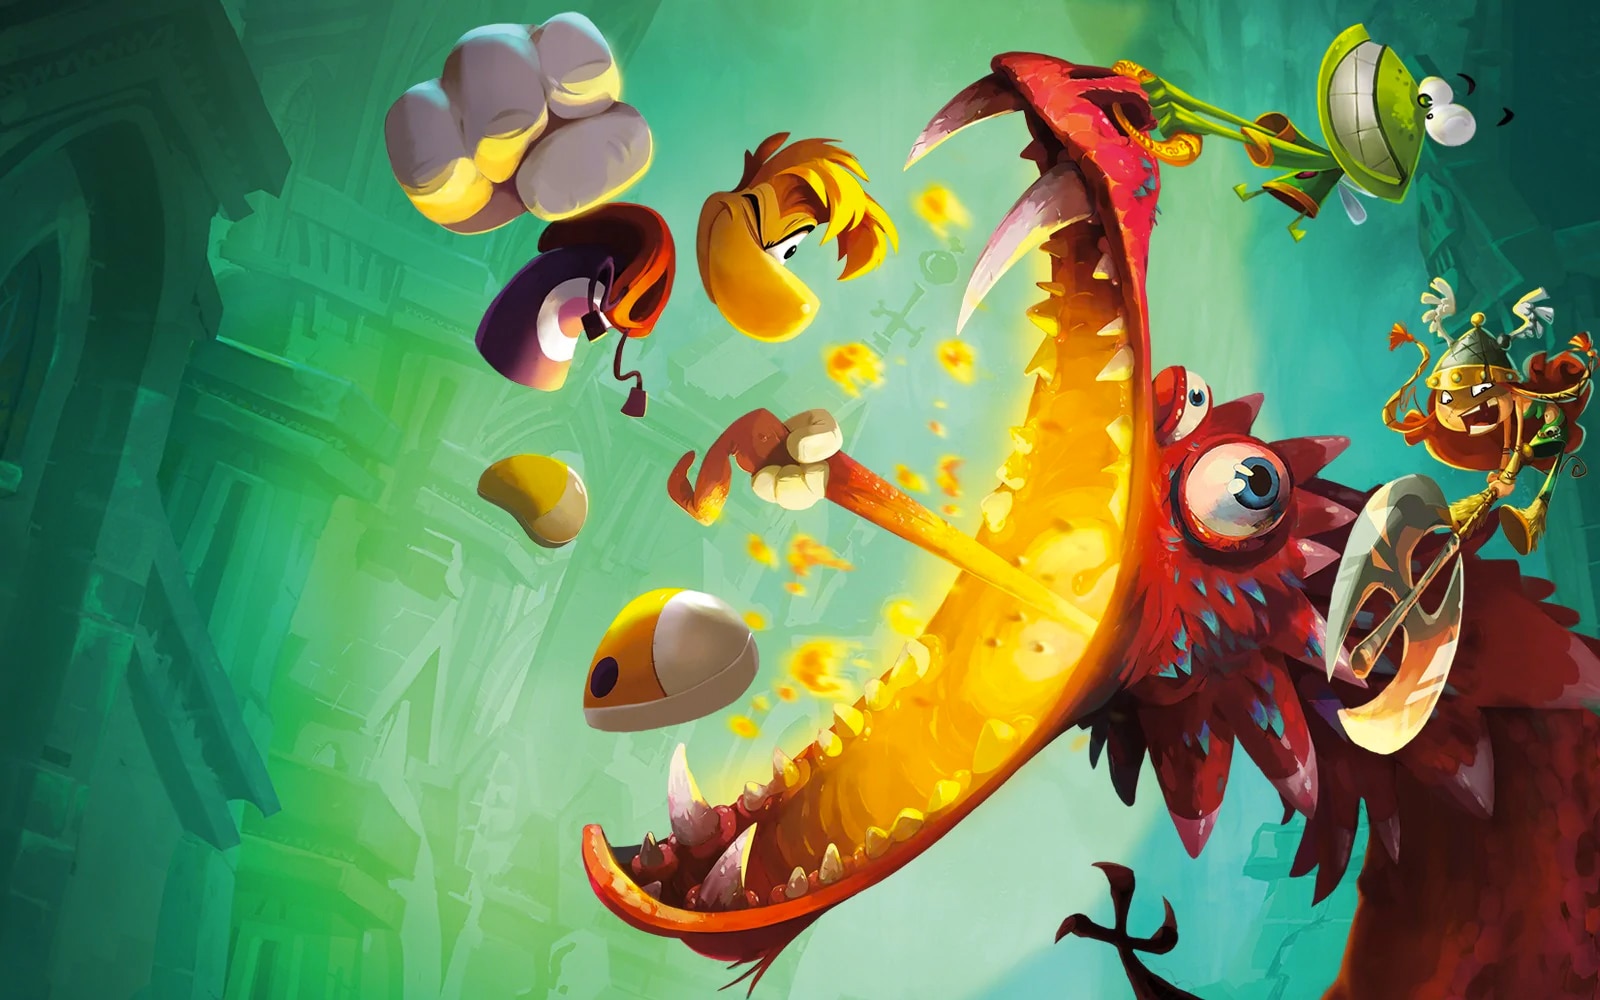 Rayman Legends gameplay (Nivel 1) Requisitos e impresiones 